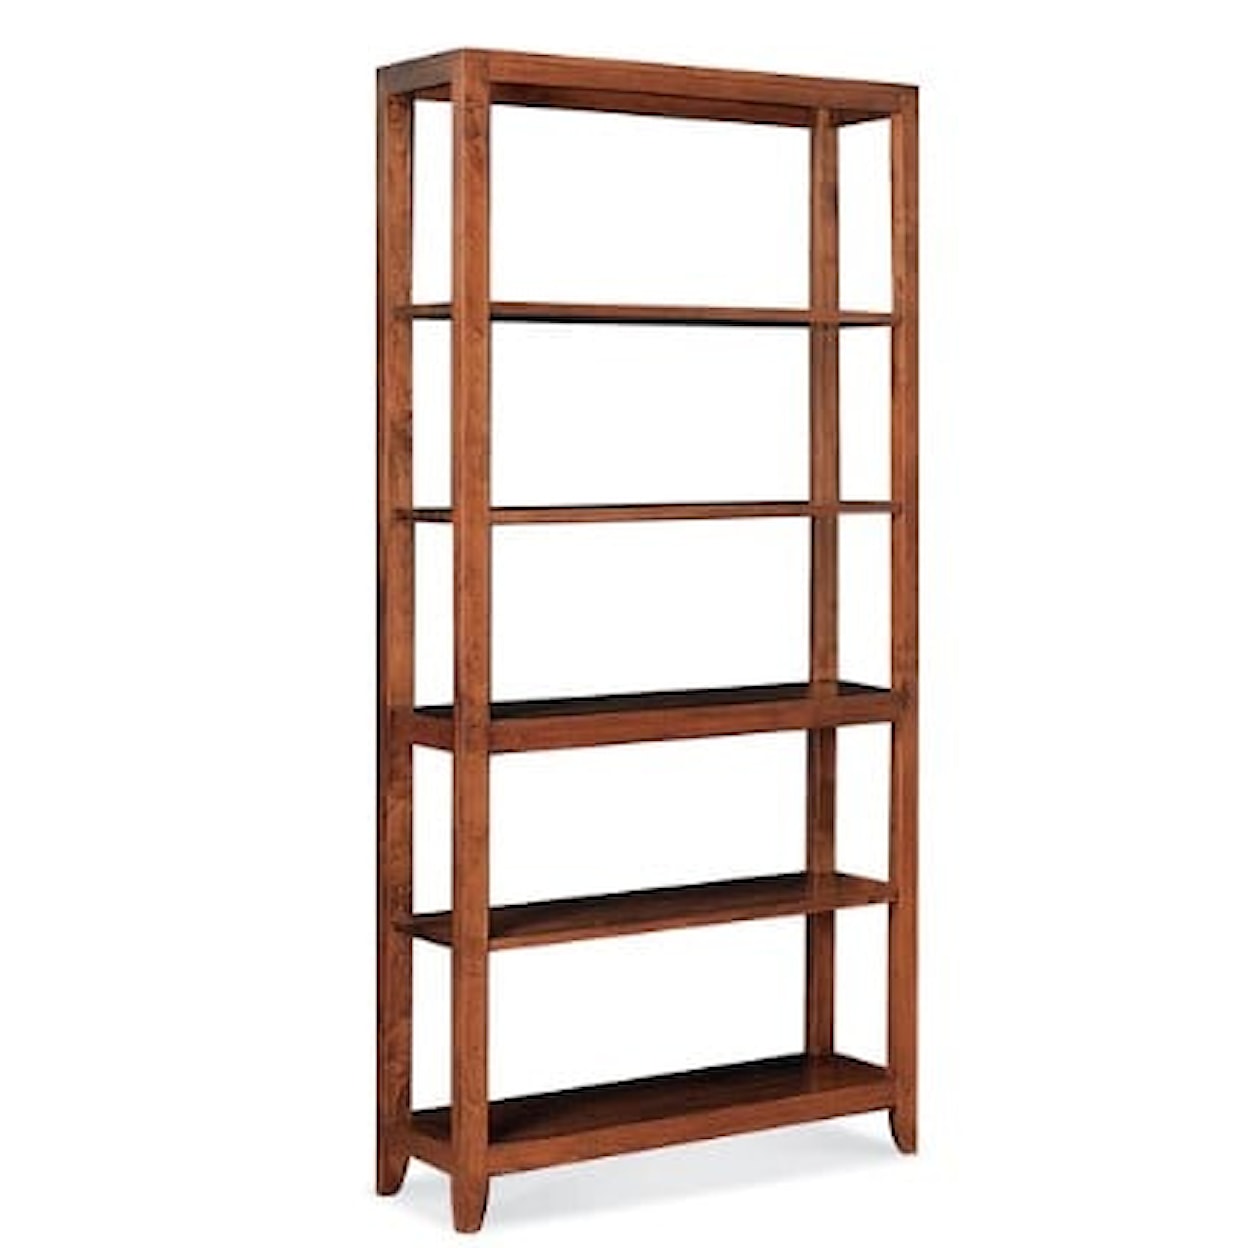 Stickley Nichols and Stone Collection CARLISLE ETAGERE